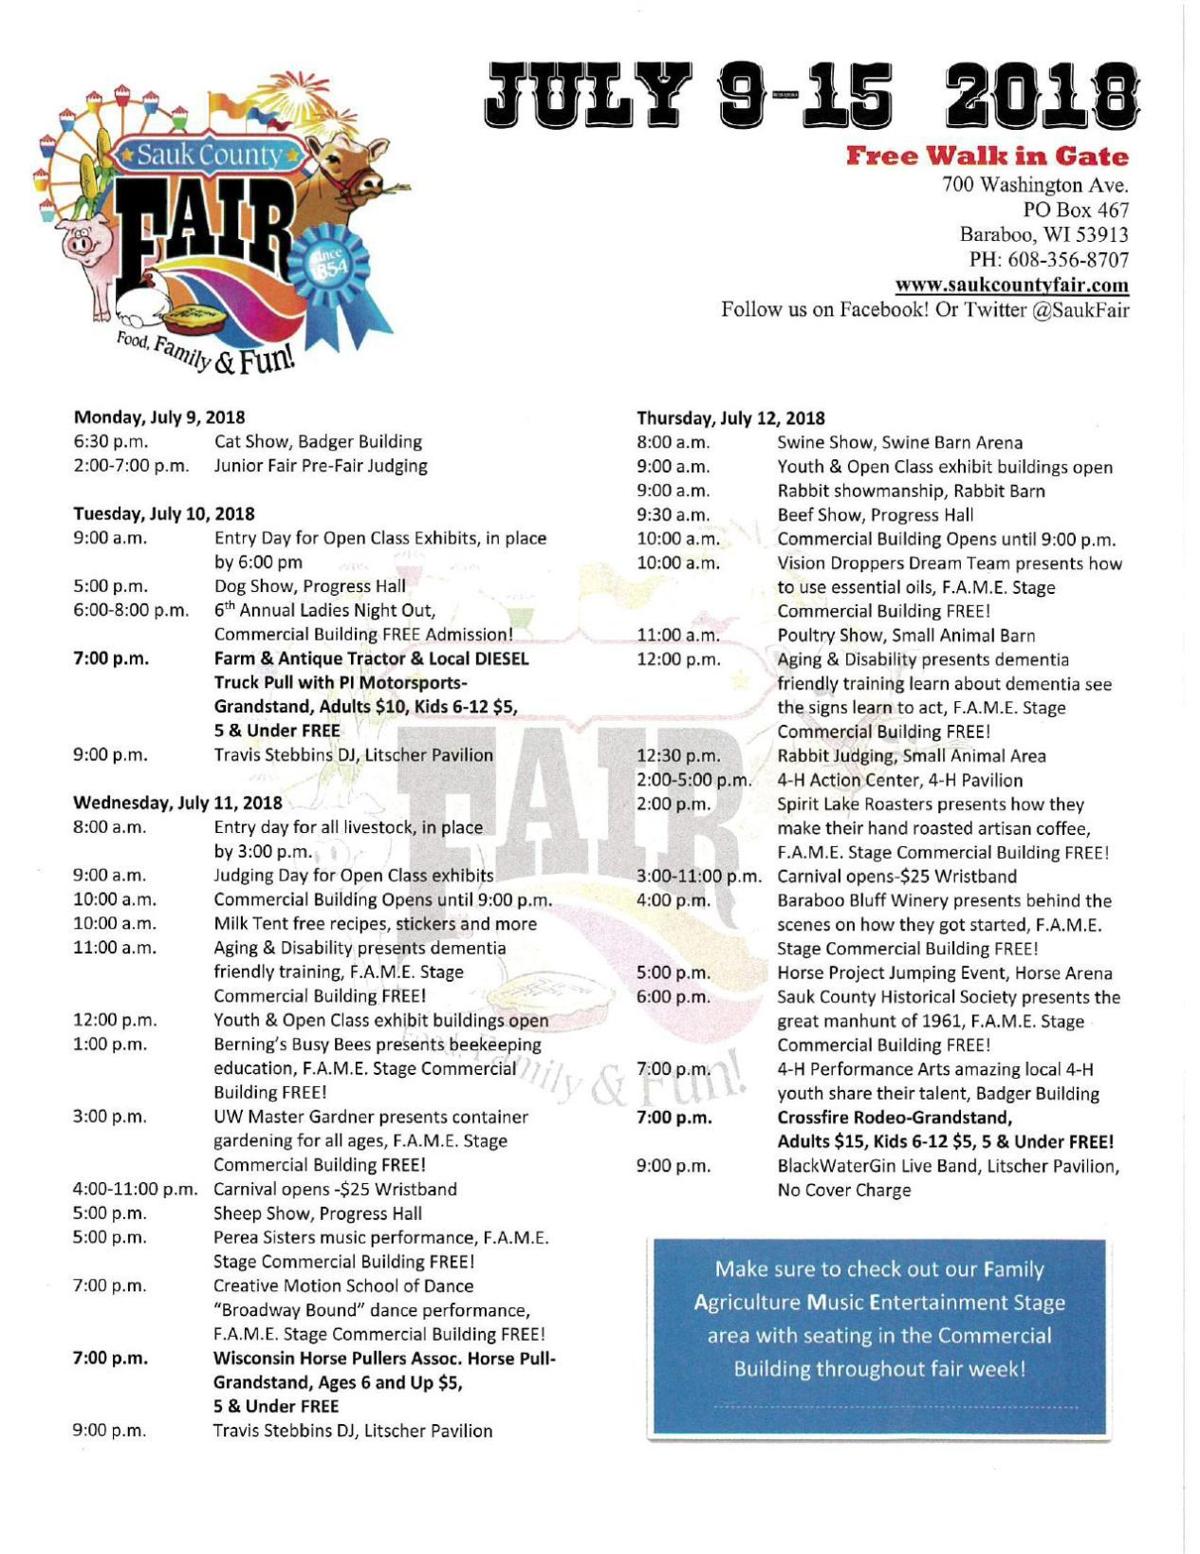 This weekend at the Sauk County Fair Regional news wiscnews com